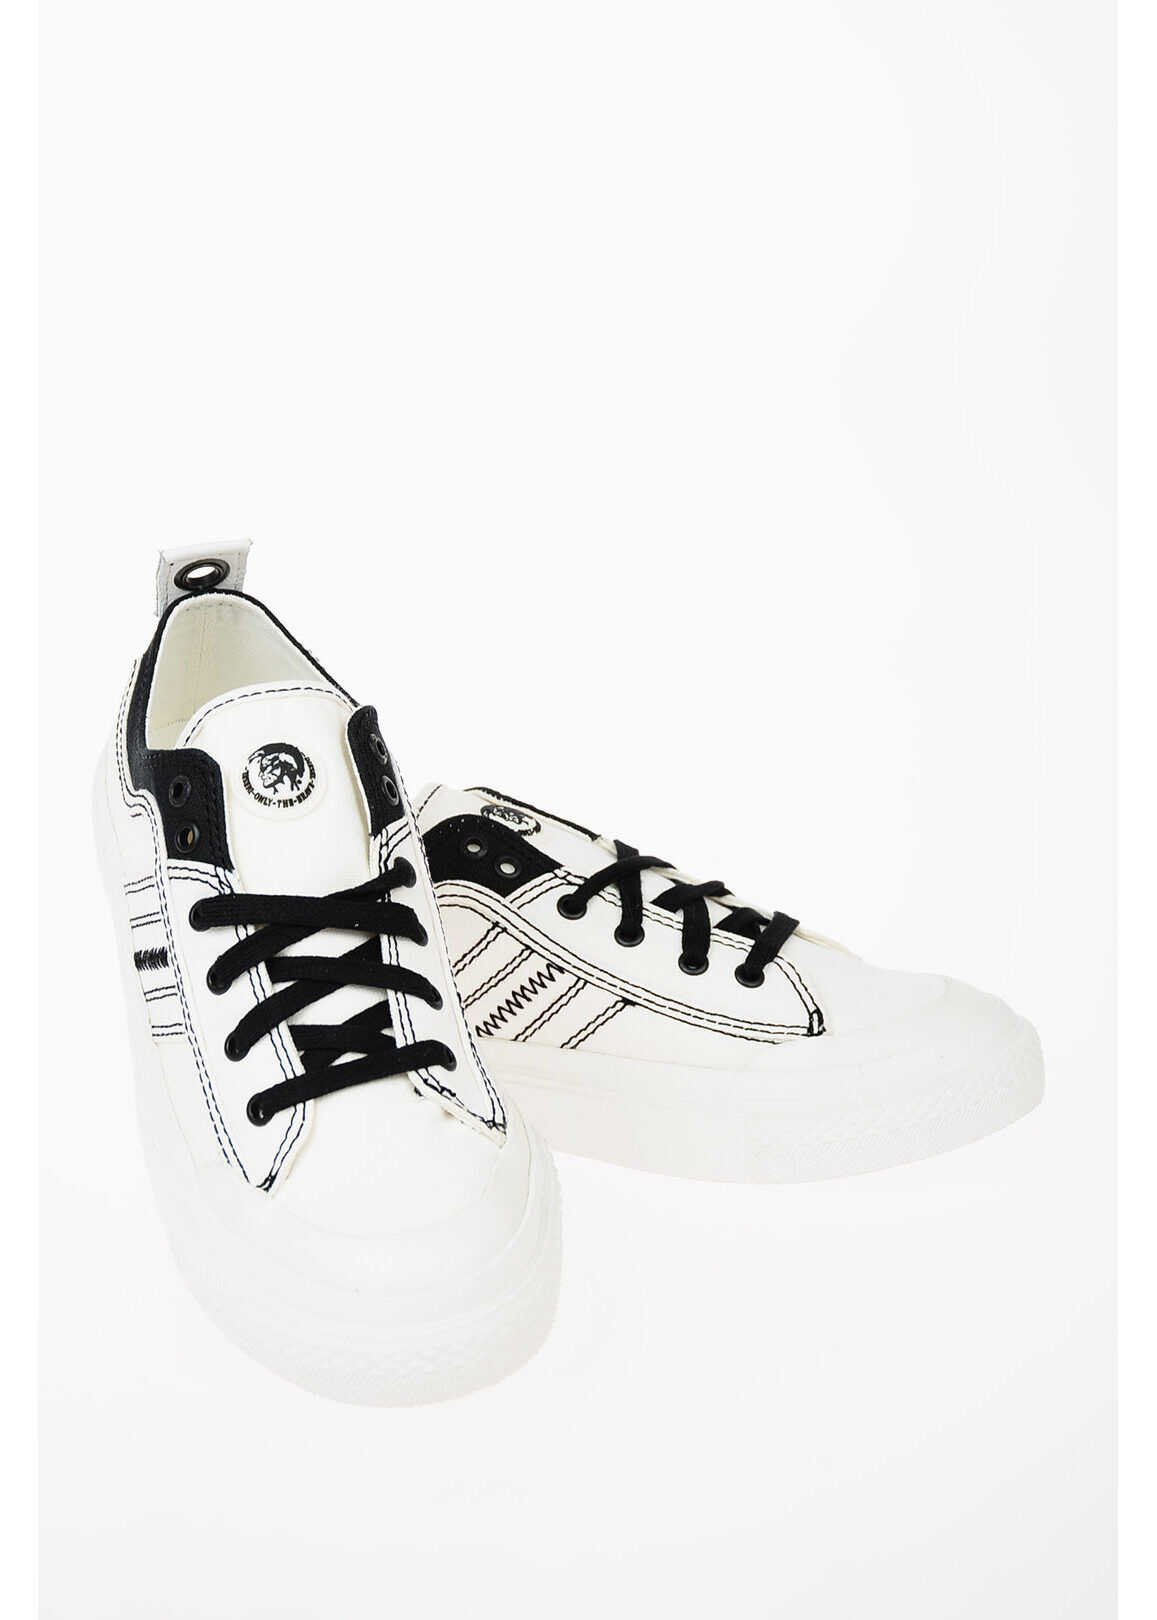 Diesel Fabric ASTICO S-ASTICO LOW LACE Sneakers BLACK & WHITE